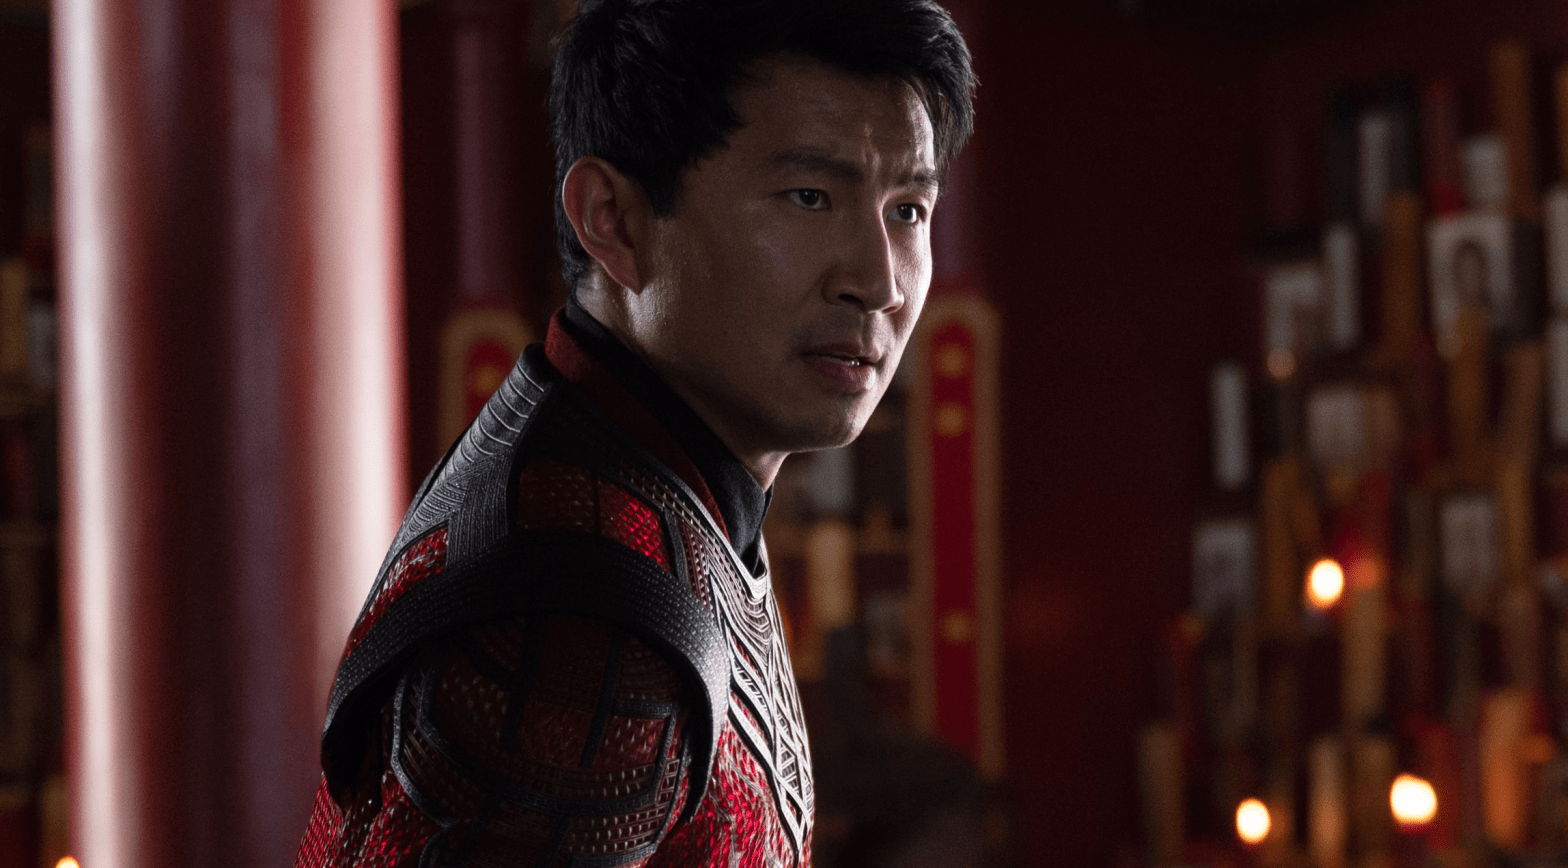 Shang-Chi stands ready to face his destiny. (Image: Marvel Studios)